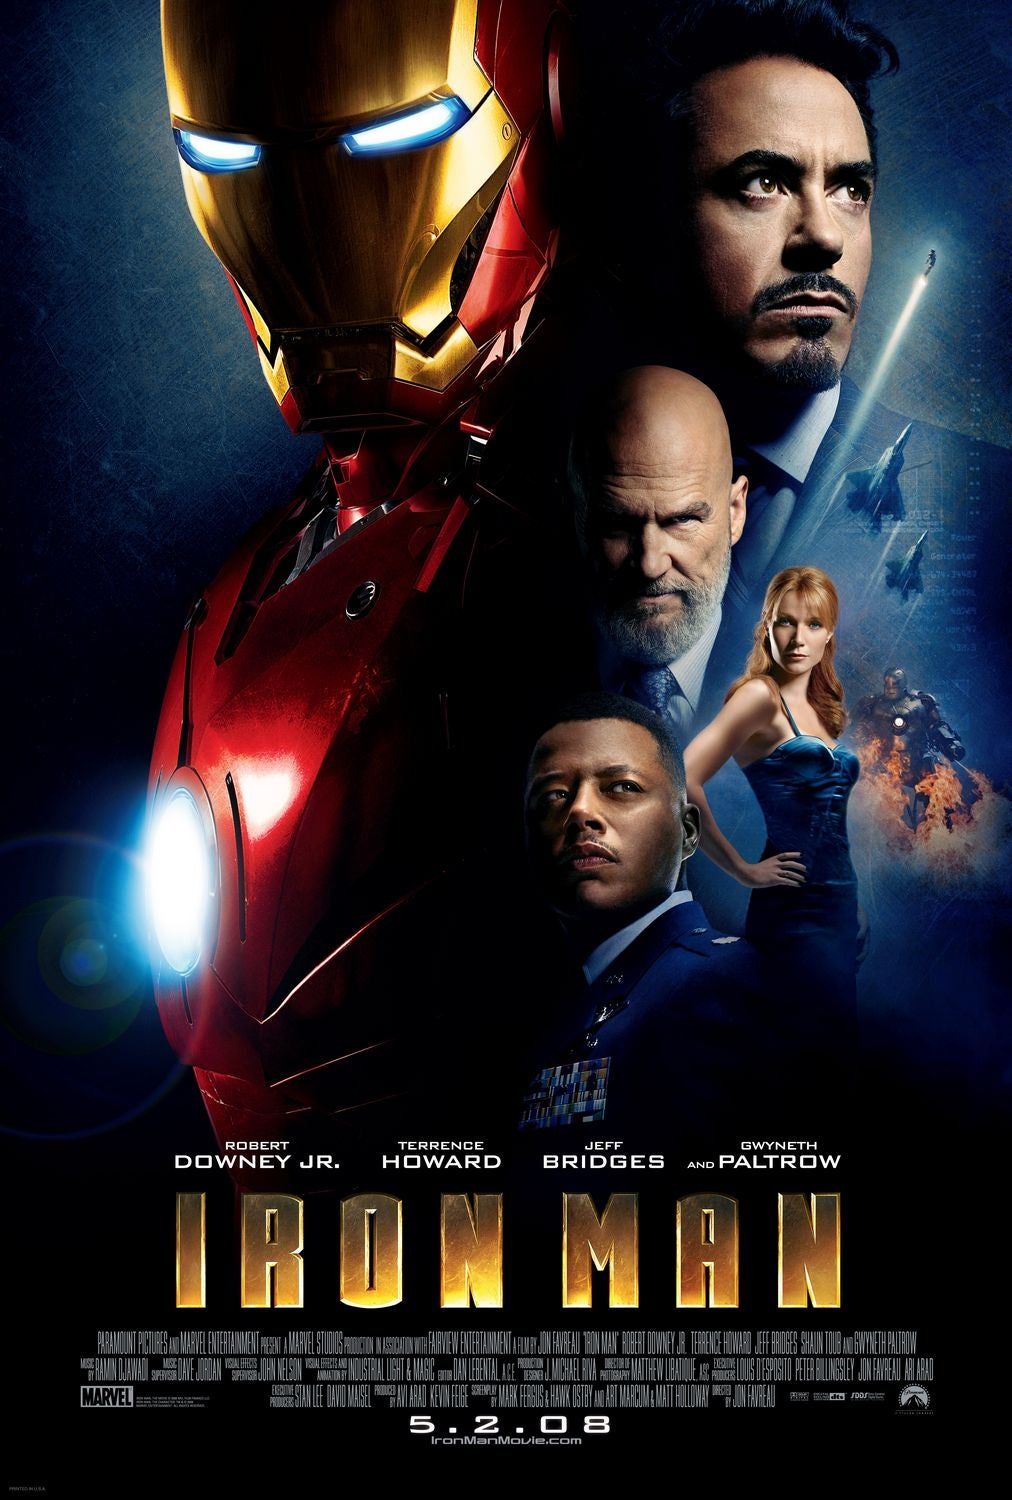 Here Are the Theatrical Posters for Every Marvel Cinematic